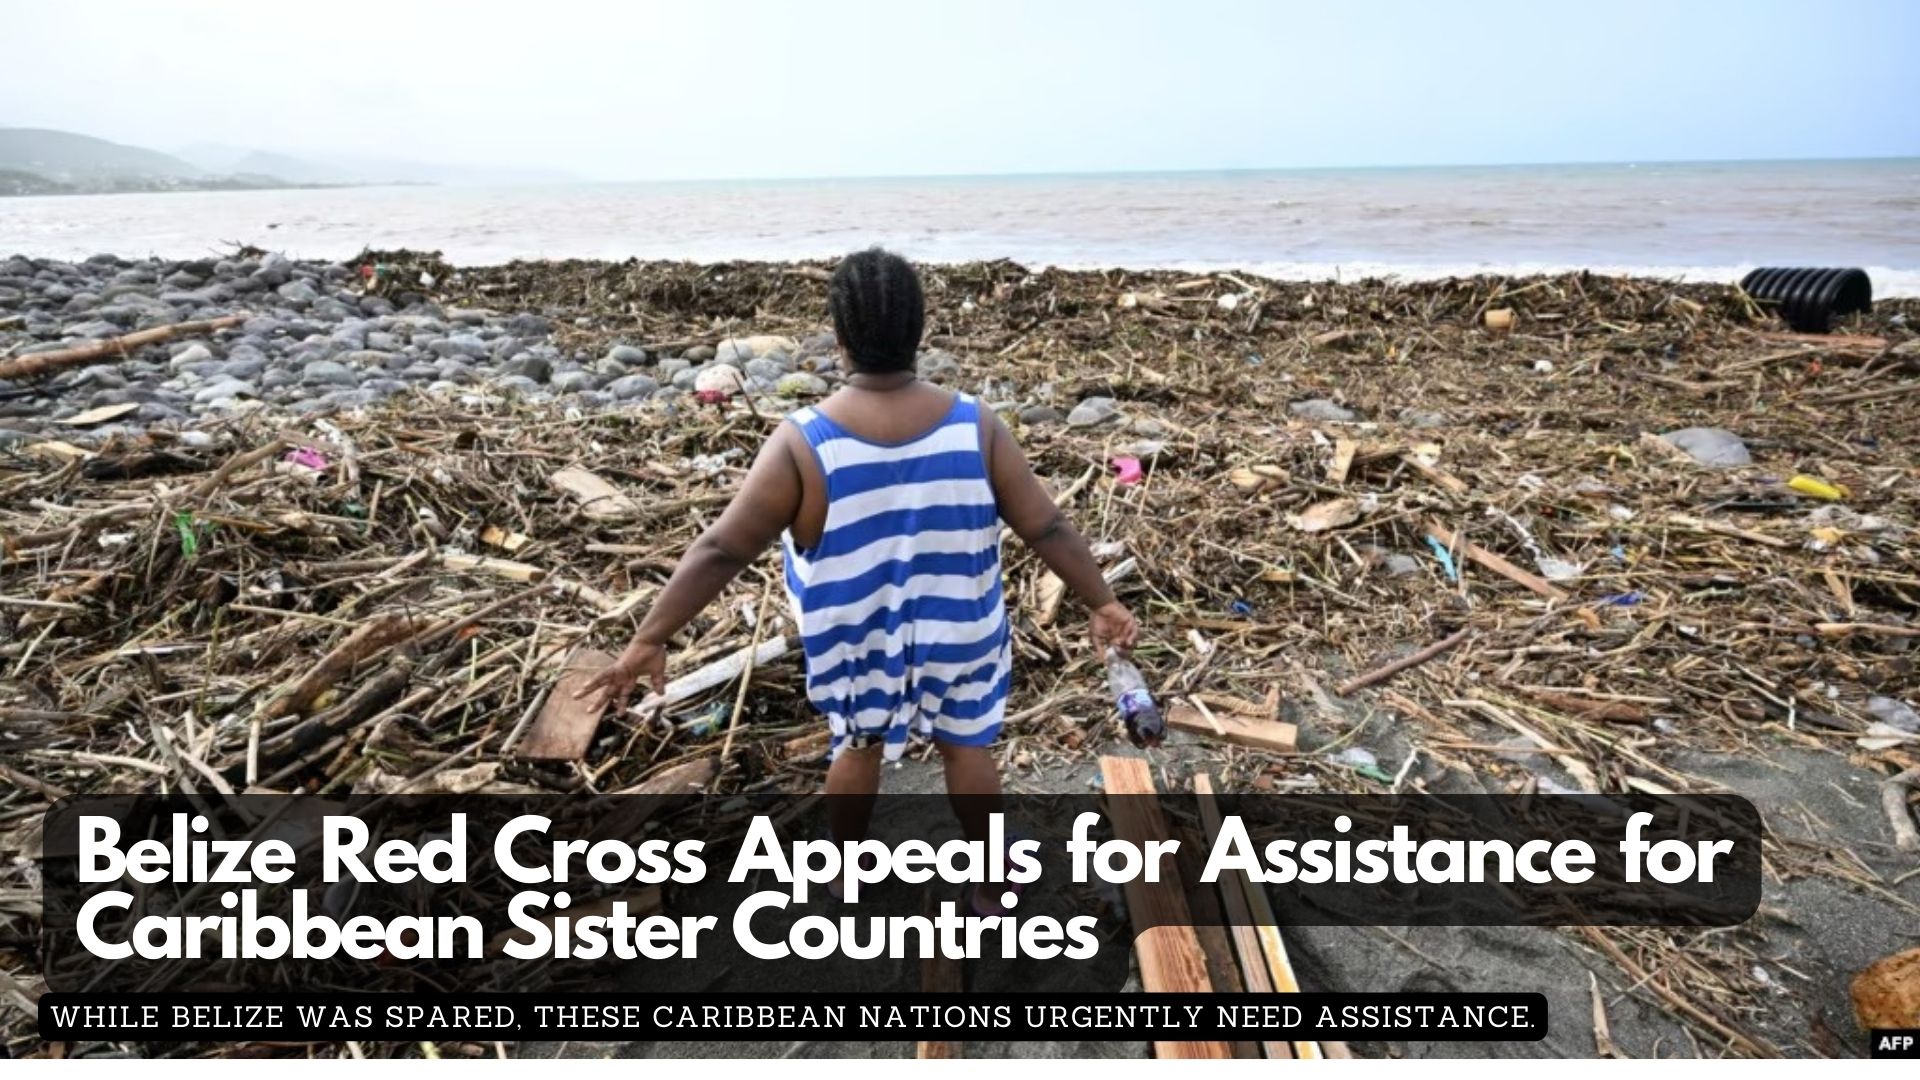 Belize Red Cross Appeals for Assistance for Caribbean Sister Countries